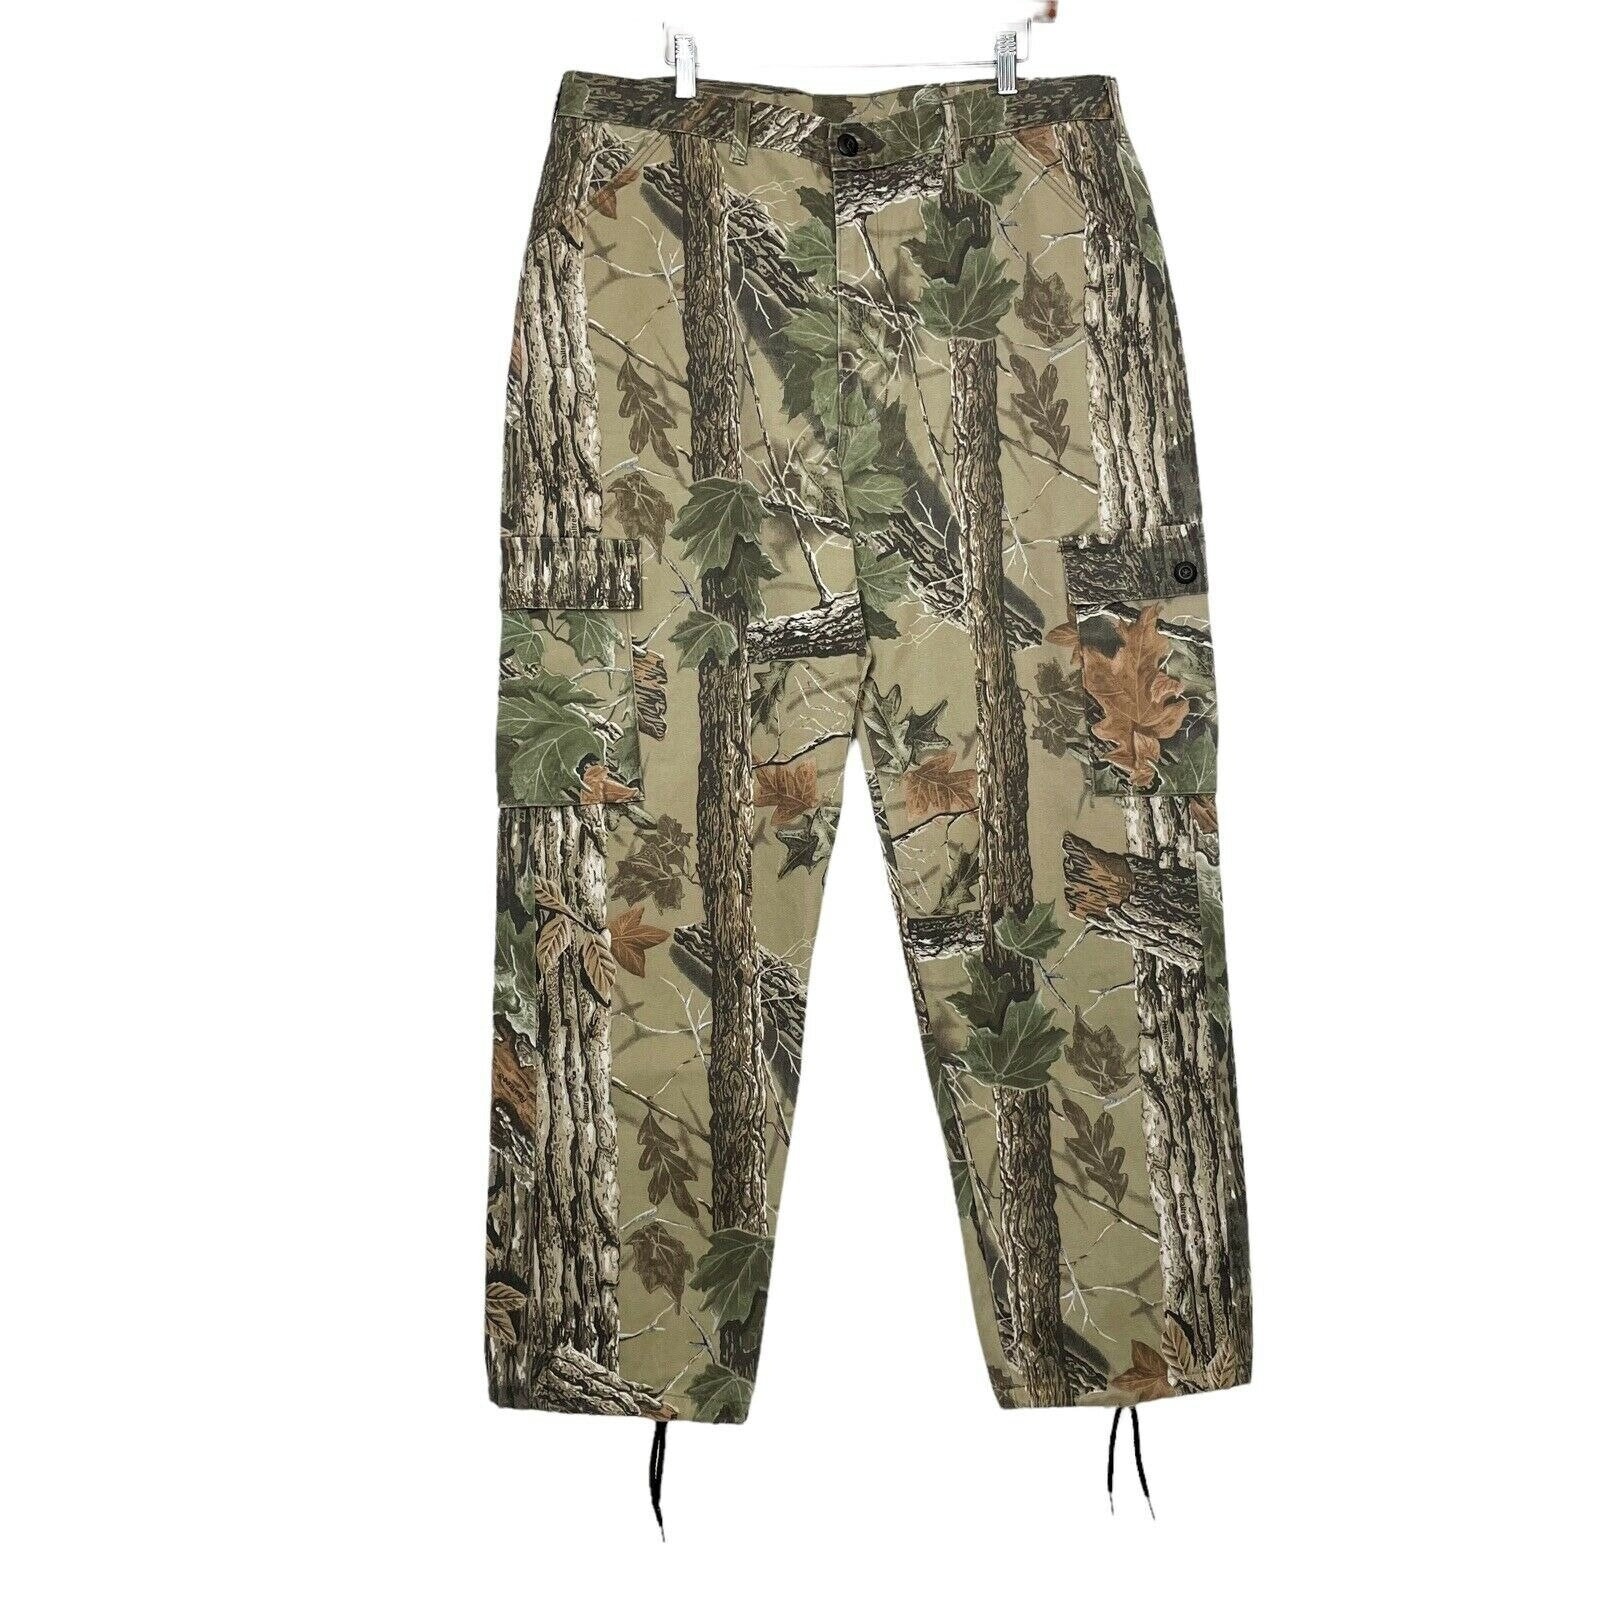 Mens Realtree Forest Camouflage Cargo Utility Trousers Hunting Jungle Camo M-2XL 